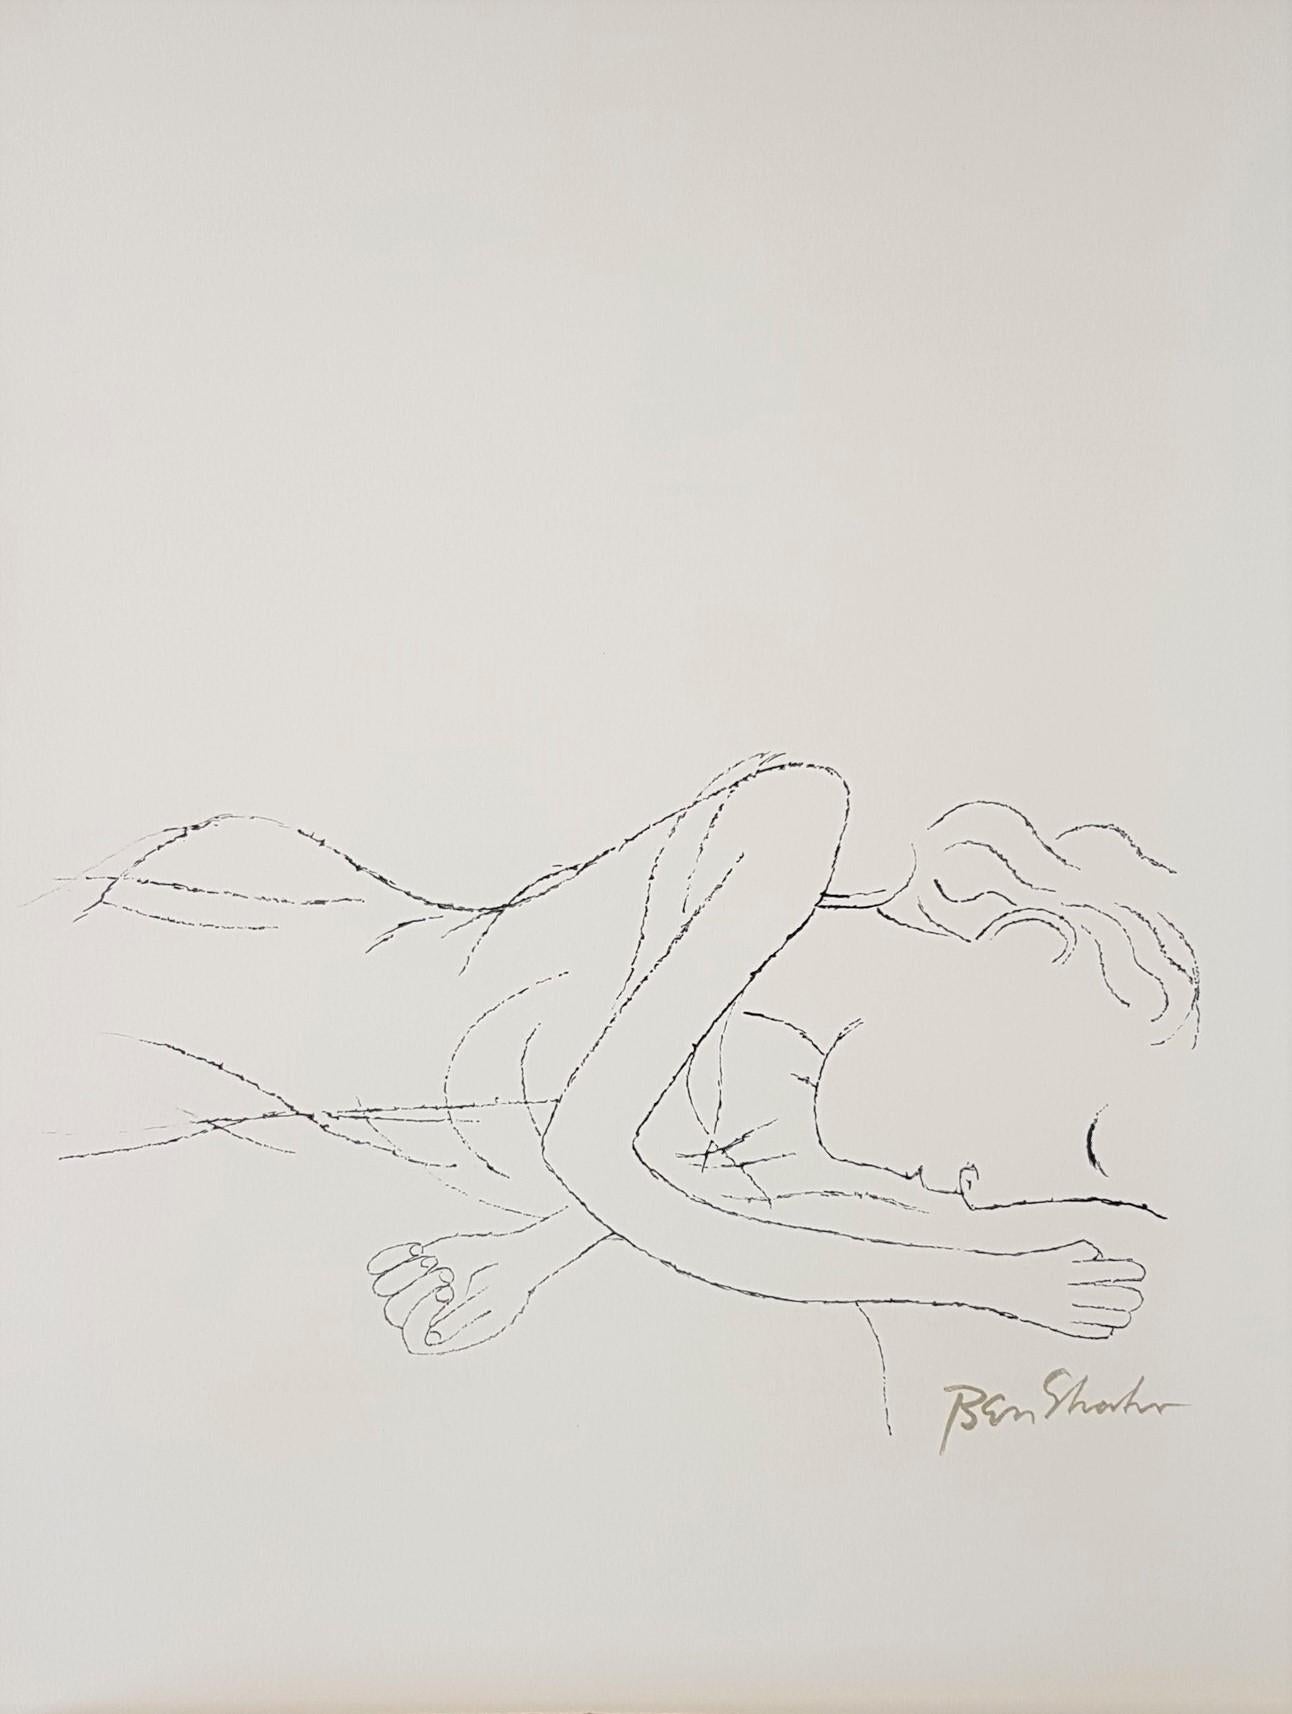 Of light, white, sleeping women in childbed - For the Sake of A Single Verse - Print by Ben Shahn